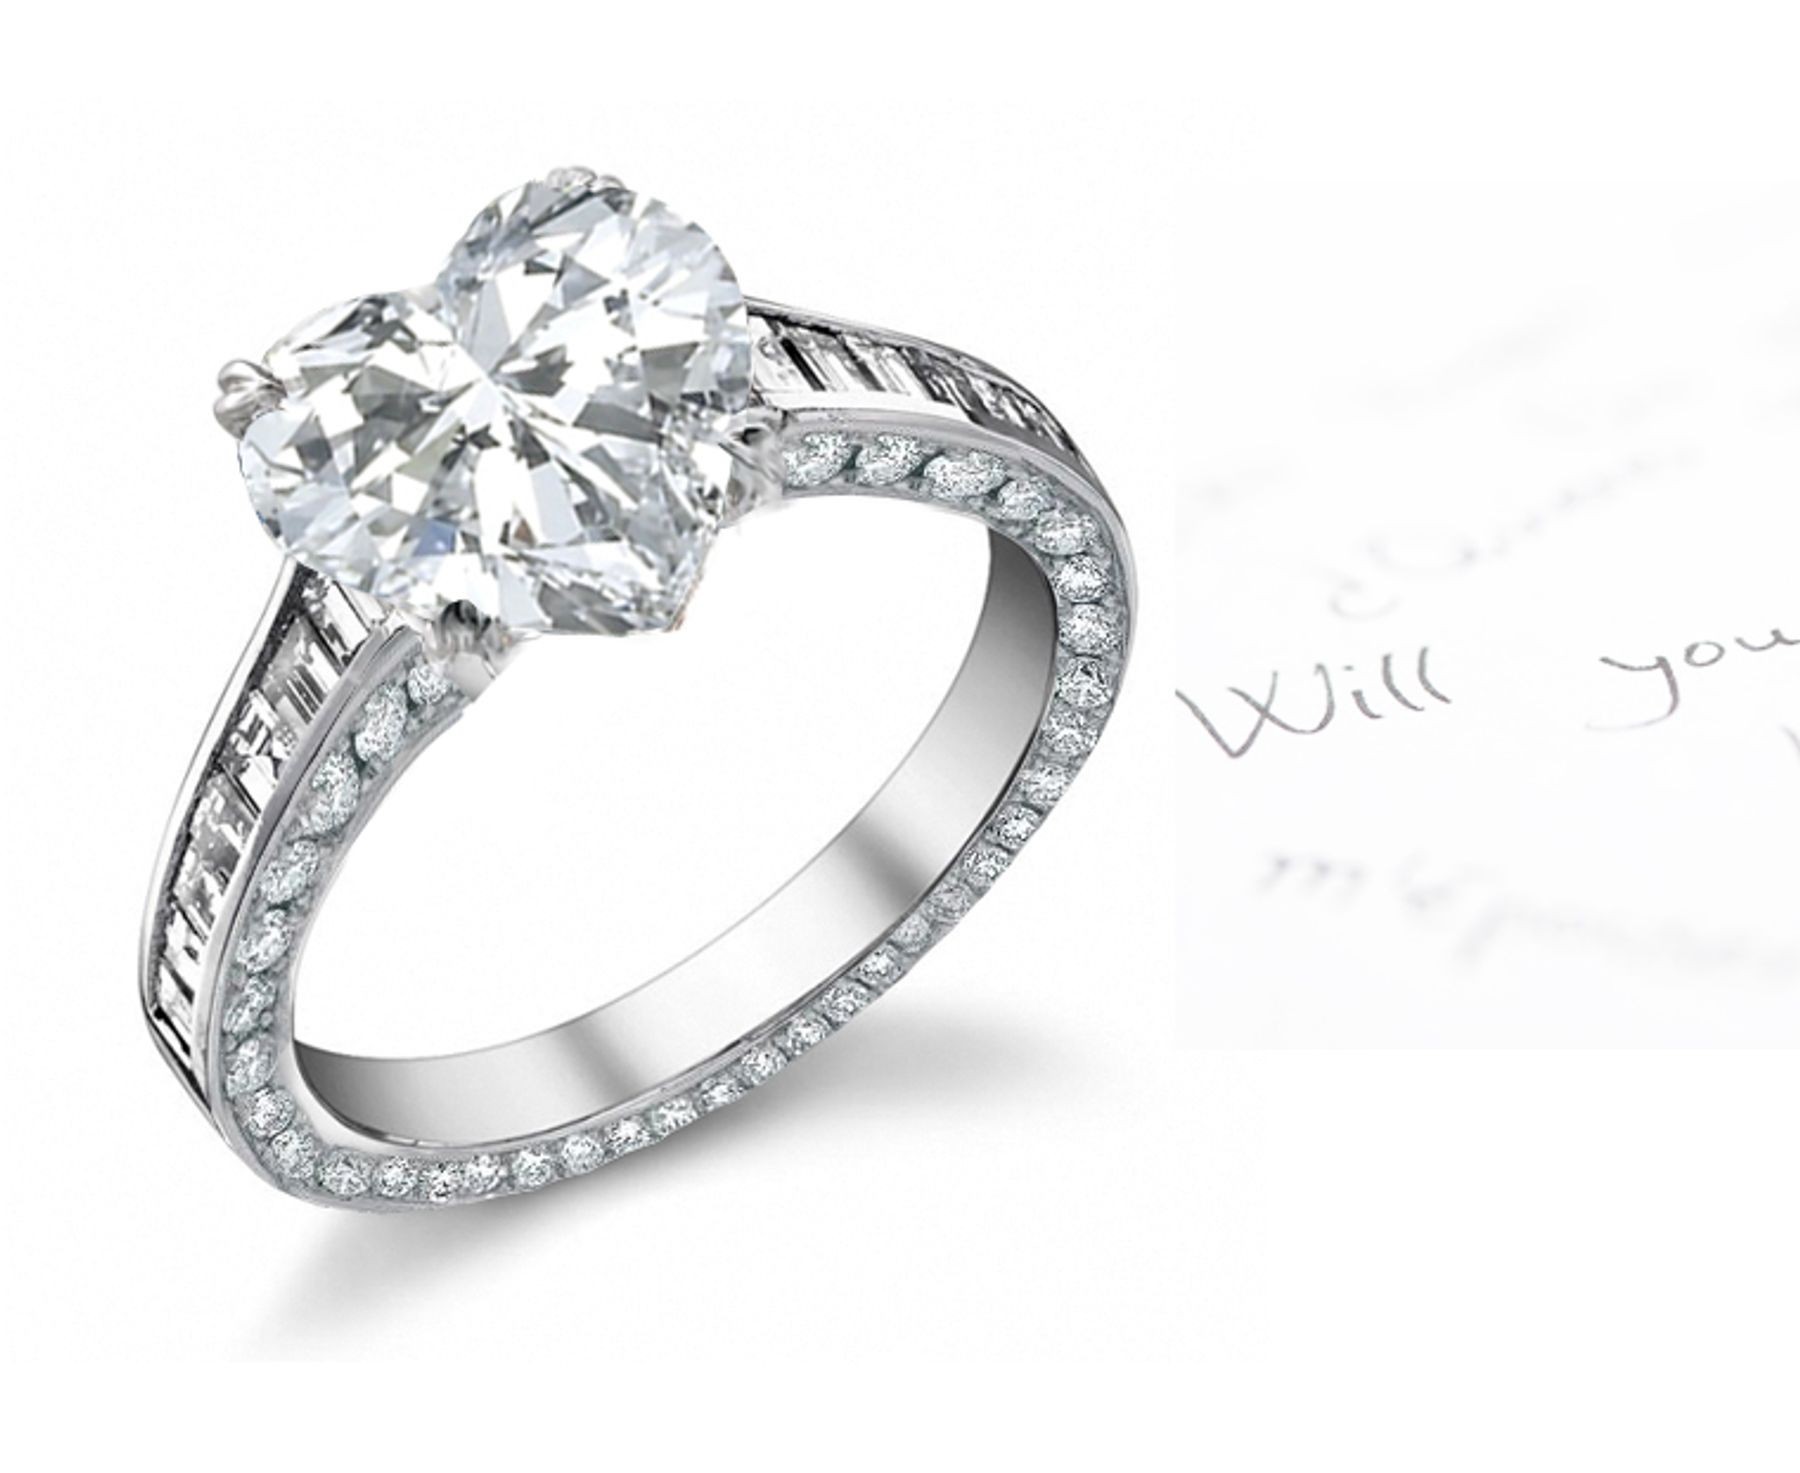 Heart & Baguette Diamond Engagement Ring in Platinum & Gold with Diamond Halo